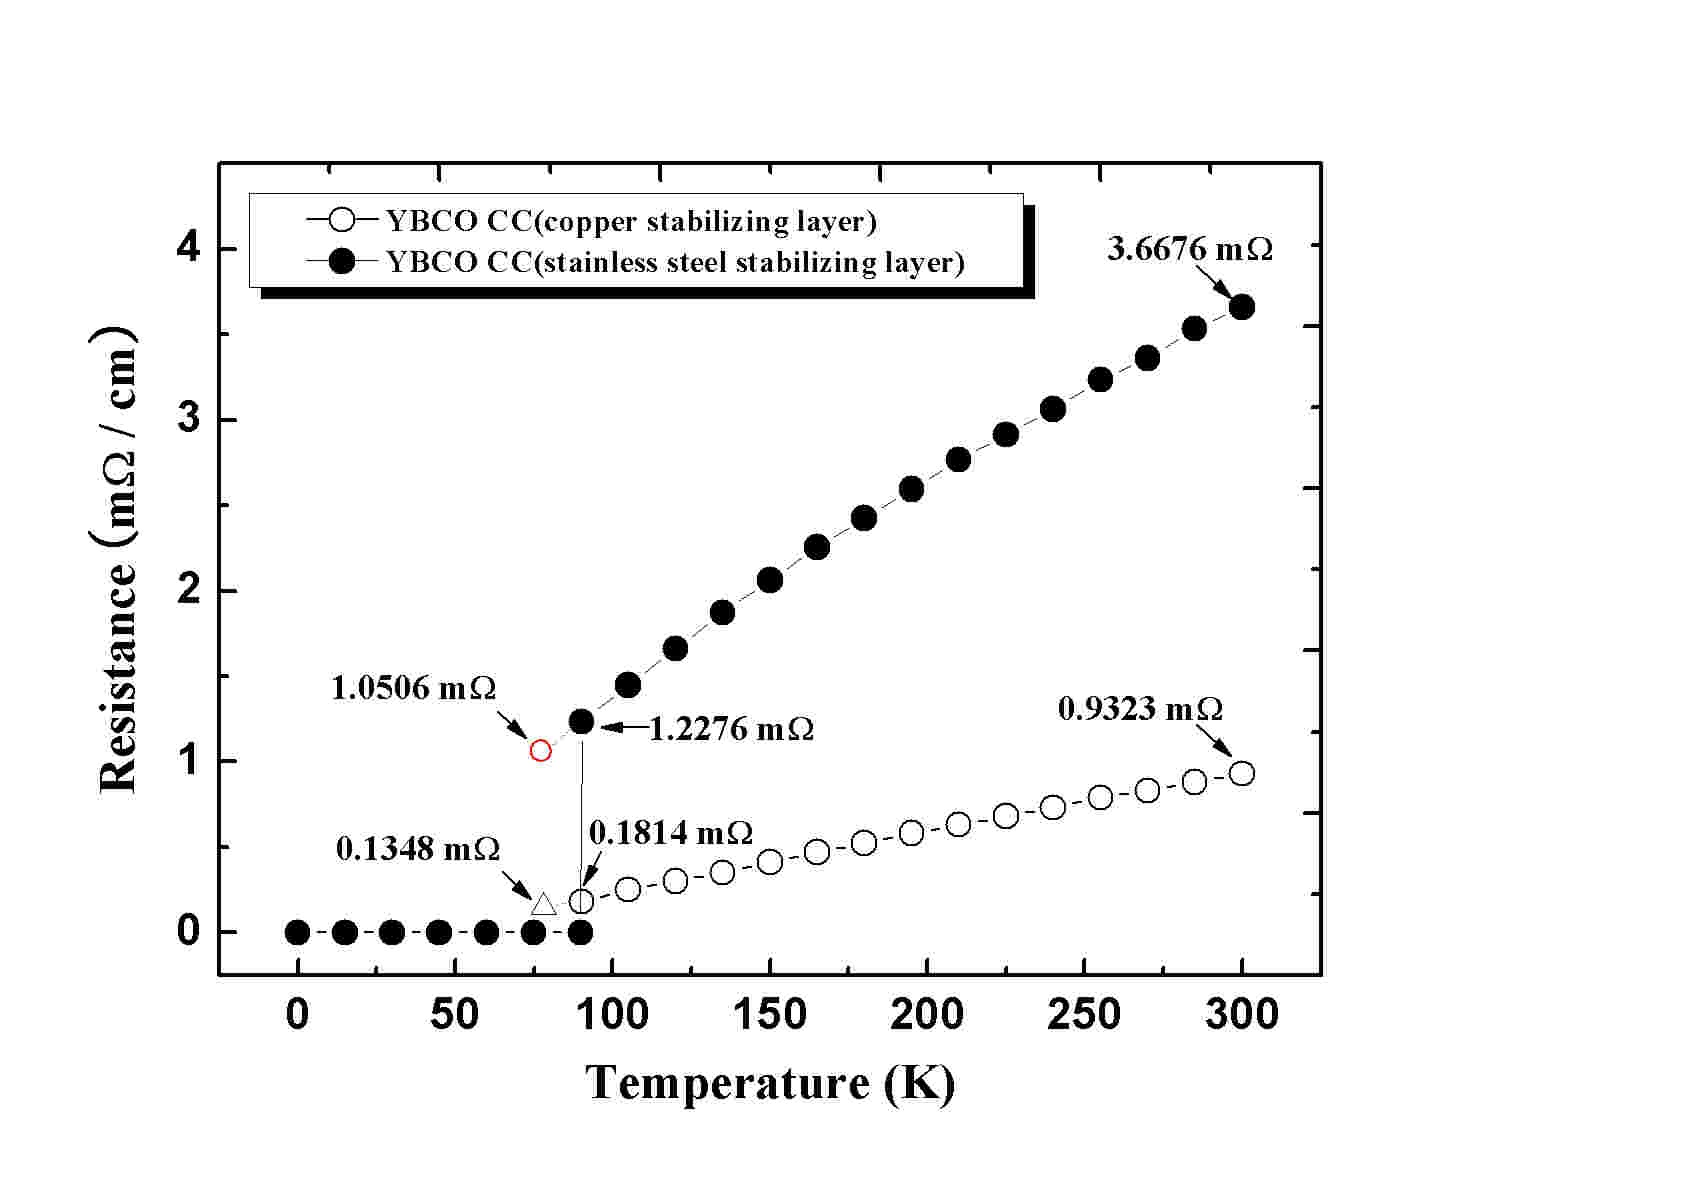 Resistance variation according to temperature of YBCO coated conductor.